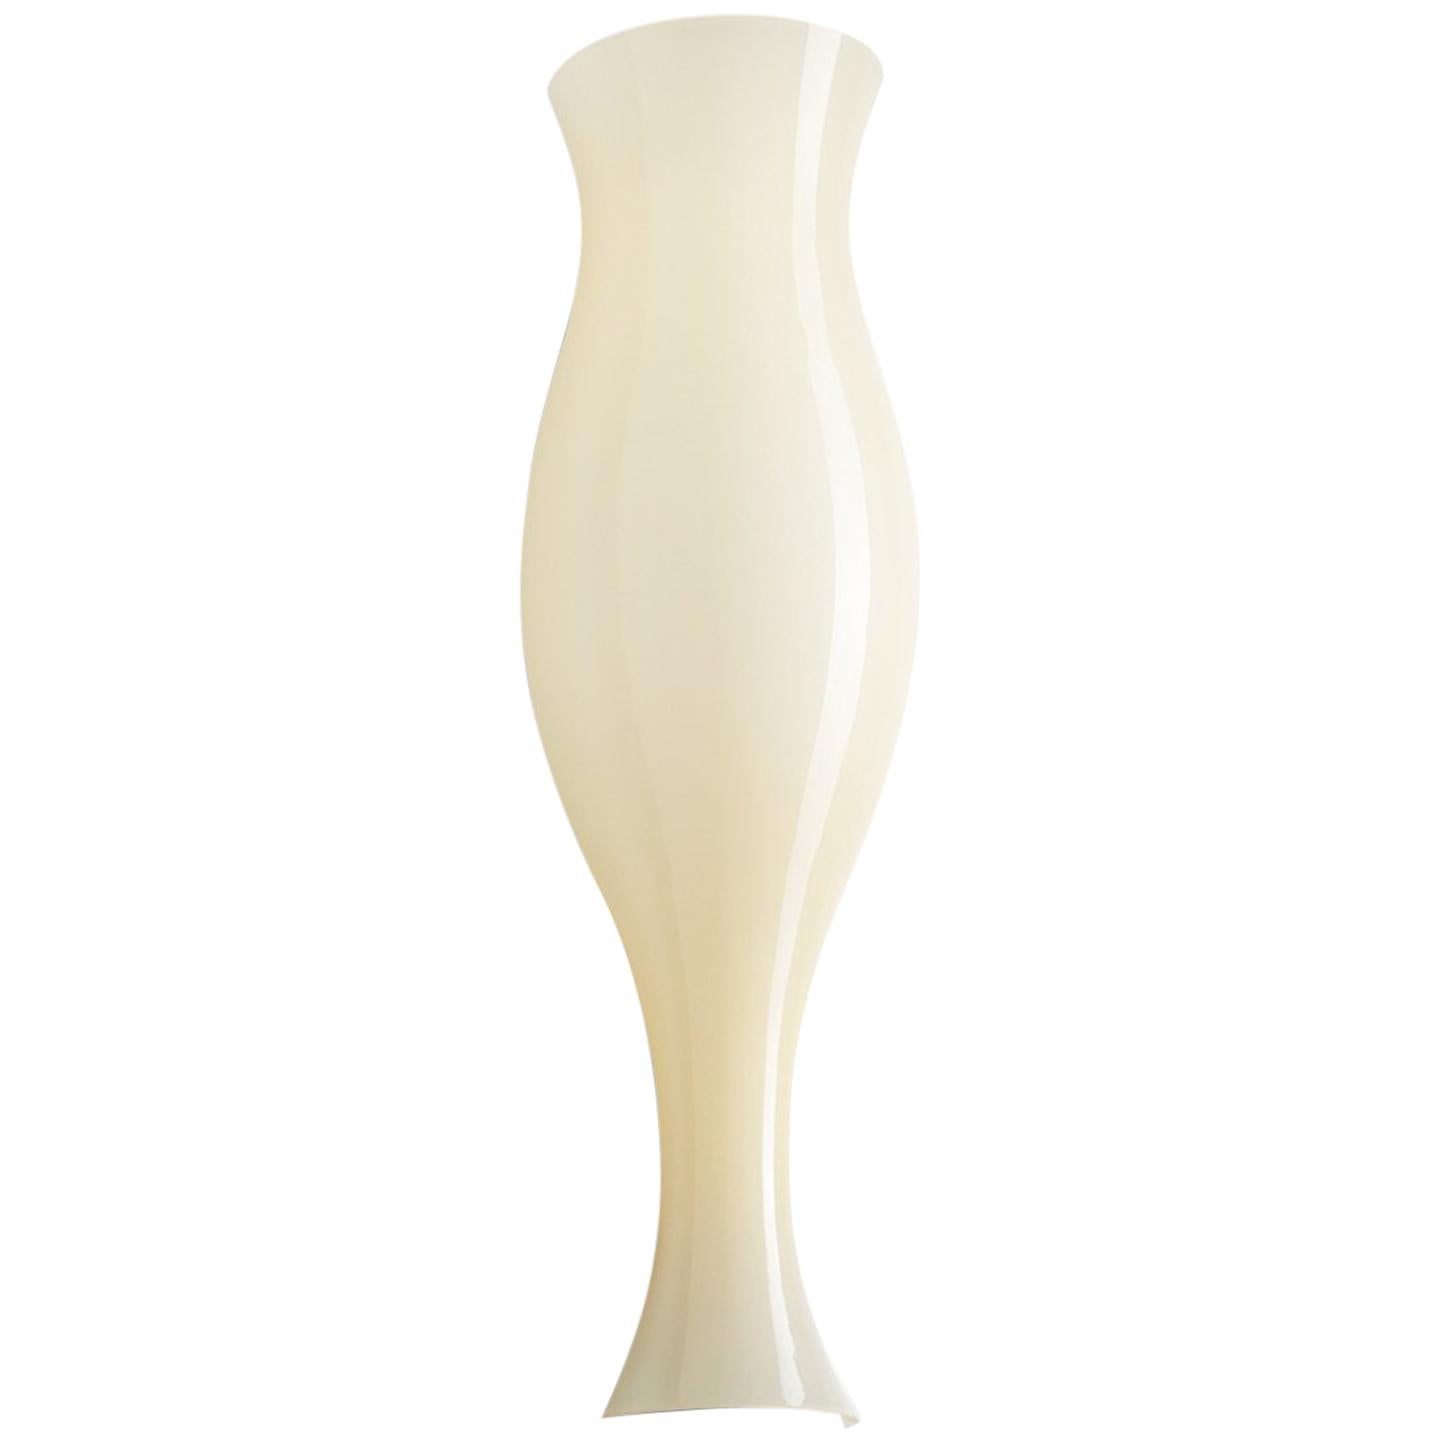 Modern Leucos Spring P Wall Sconce in Glossy Honey & Matte White by Eva Zeisel For Sale